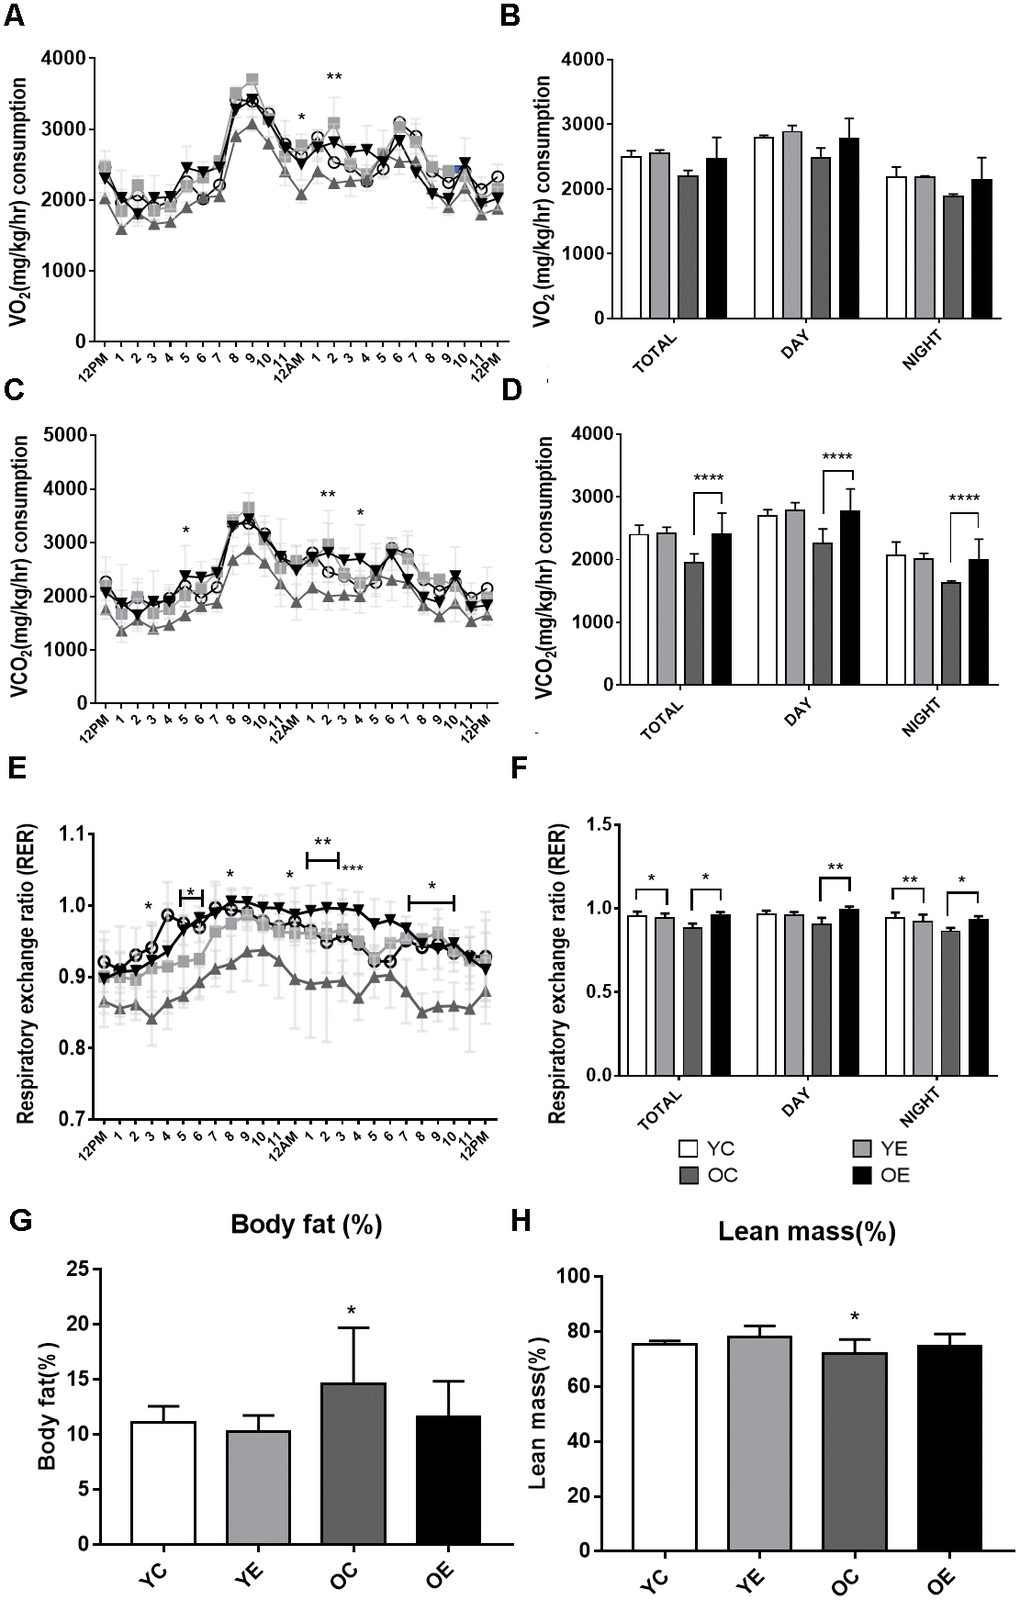 Analysis of energy metabolism during exercise in young and aged mice. (A–F) Metabolic measurements were performed in young control, young exercise, old control, and old exercise groups (n = 5, respectively) in CLAMS metabolic cages after 4-week of exercise. (A) Kinetic data for VO2 (mg/kg/hr) consumption are shown as mean for each time point in young control (YC; blue circles), young exercise (YE; red rectangles), old control (OC; green triangles) and old exercise (OE, purple reversed triangles) groups. (B) Average VO2 (mg/kg/hr) are shown for total, night (dark) and day (light) cycles. (C) Kinetic data for VCO2 (mg/kg/hr) production are shown as mean for each time point in YC, YE, OC, and OE groups. (D) Average VCO2 (mg/kg/hr) production are shown for total, night (dark) and day (light) cycles. (E) Kinetic data for respiratory exchange ratio (RER) is shown as mean for each time point in YC, YE, OC, and OE groups. (F) Average RER are shown for total, night (dark) and day (light) cycles. (G–H) Average percent body fat (G) and lean mass (H) for YC, YE, OC, and OE were measured using Minispec LF-50. *p p p p 